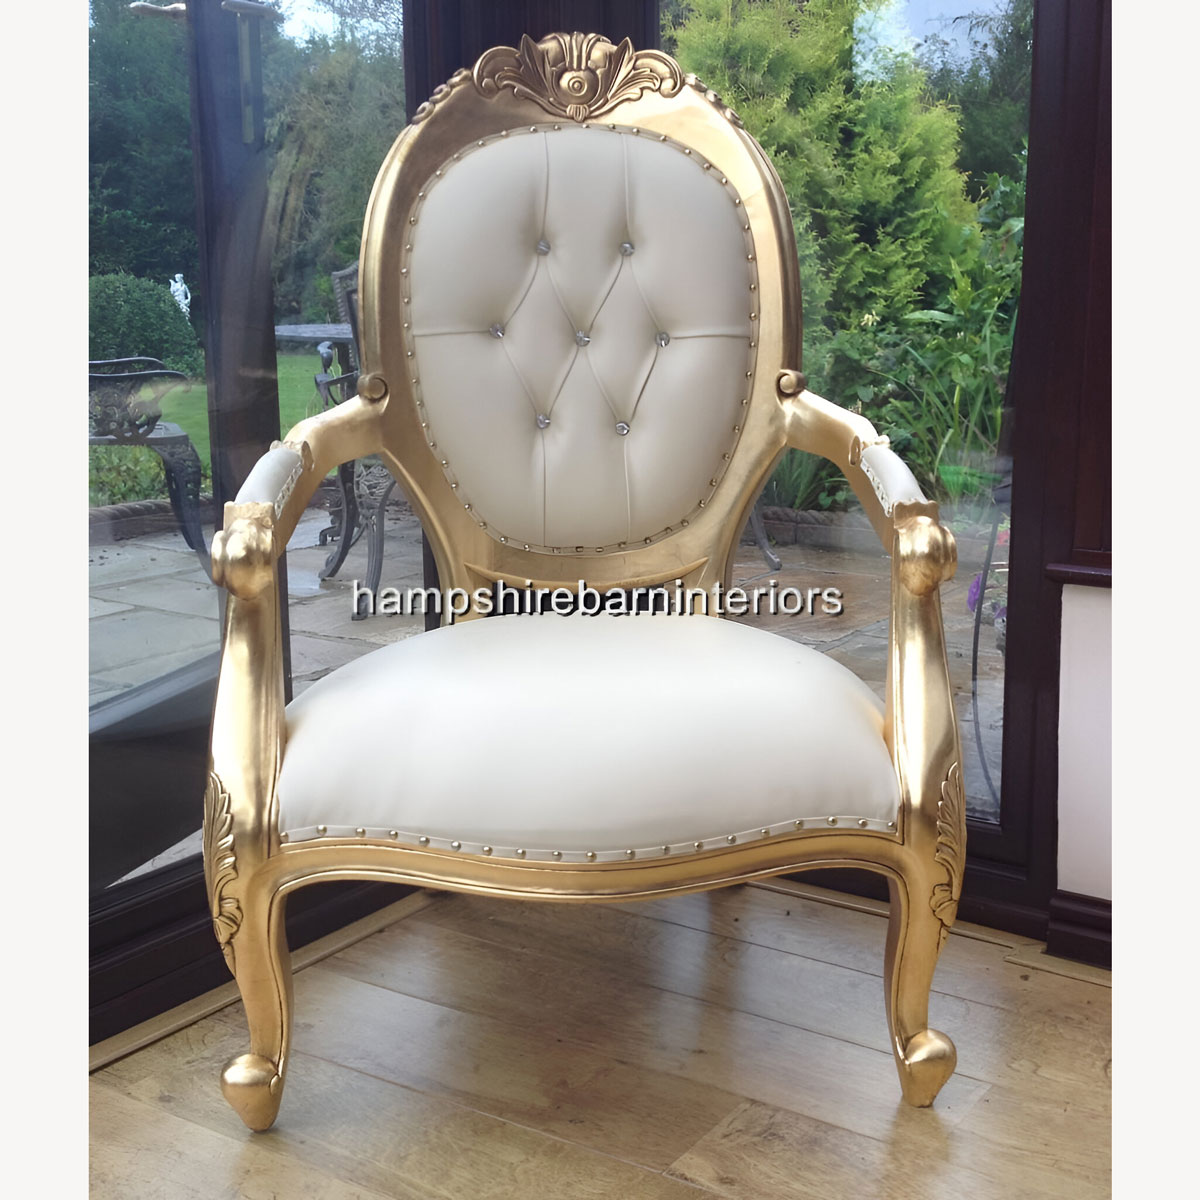 Chatsworth Chair In Gold Leaf And Cream Faux Leather Now With Diamond Crystal Buttons 1 - Hampshire Barn Interiors - Chatsworth Chair In Gold Leaf And Cream Faux Leather Now With Diamond Crystal Buttons -